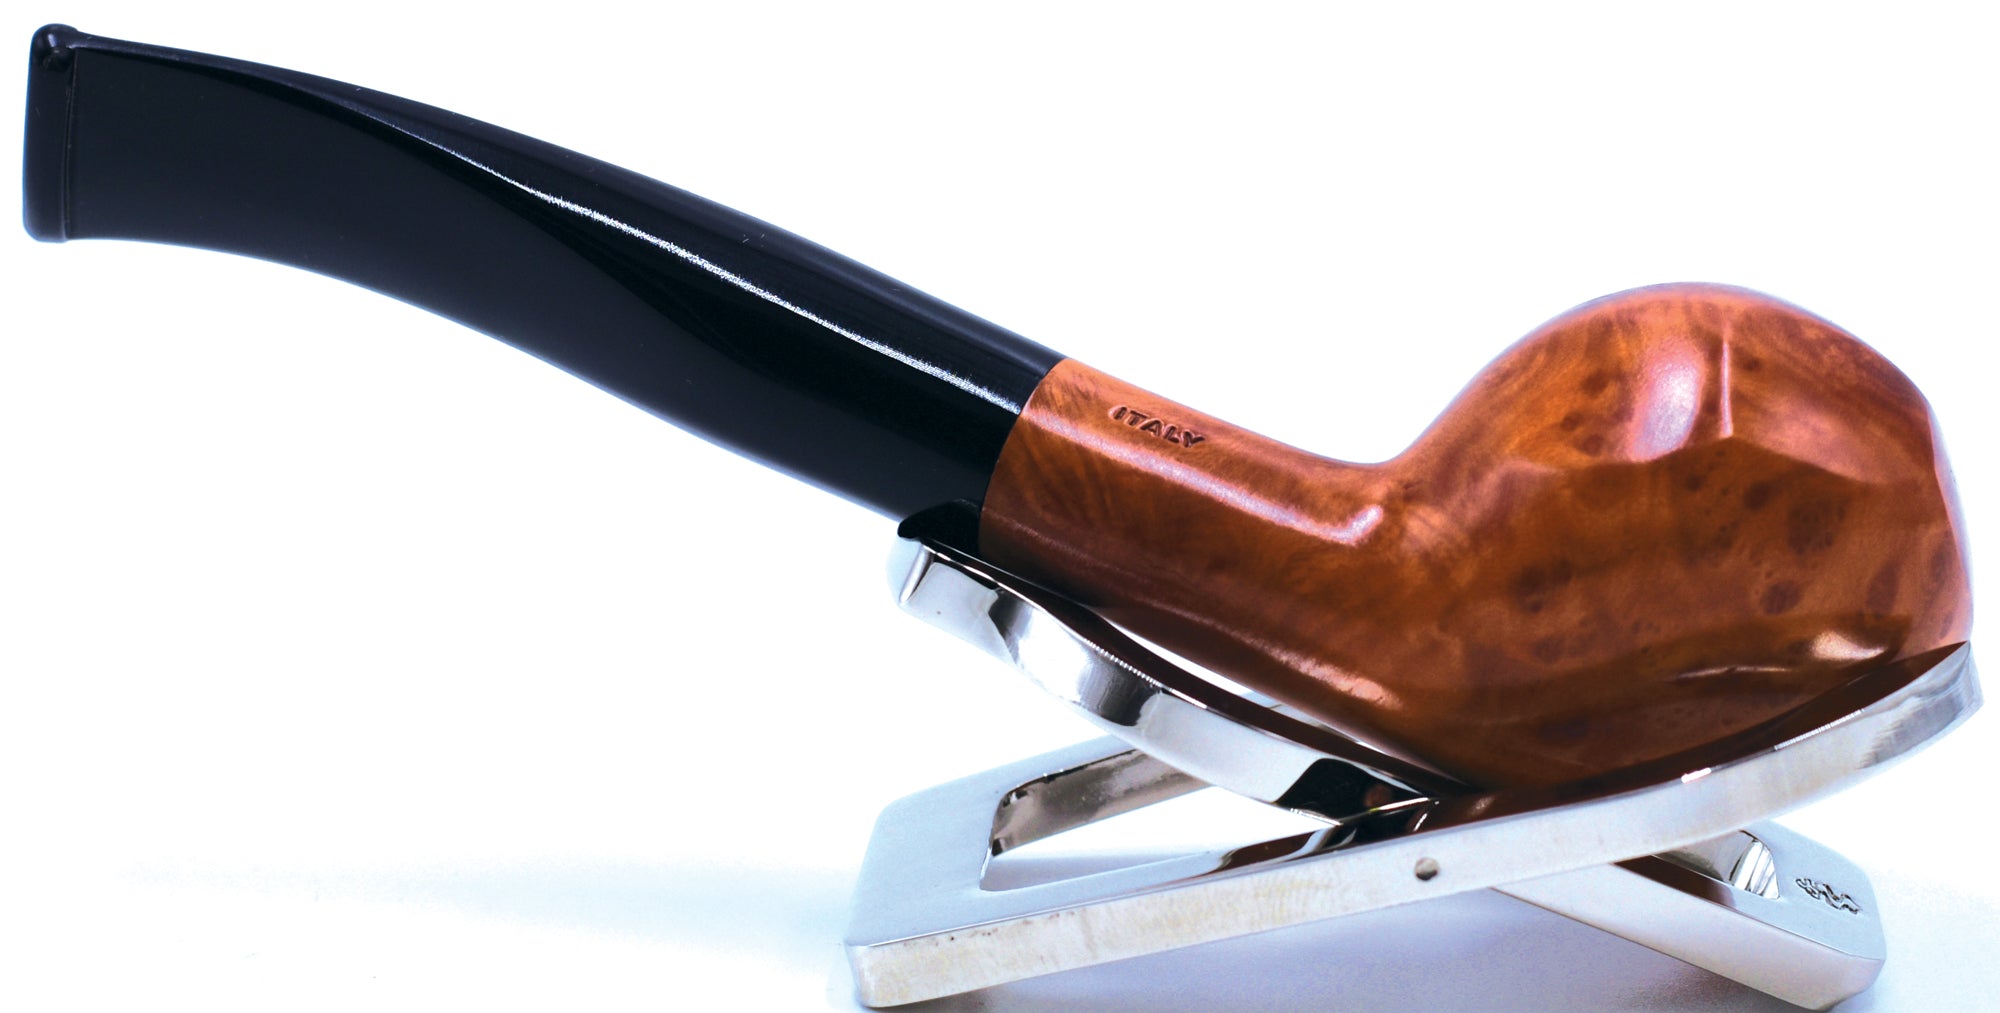 LEGENDEX® SCALADI* 9 MM Filtered Briar Smoking Pipe Made In Italy 01-08-155